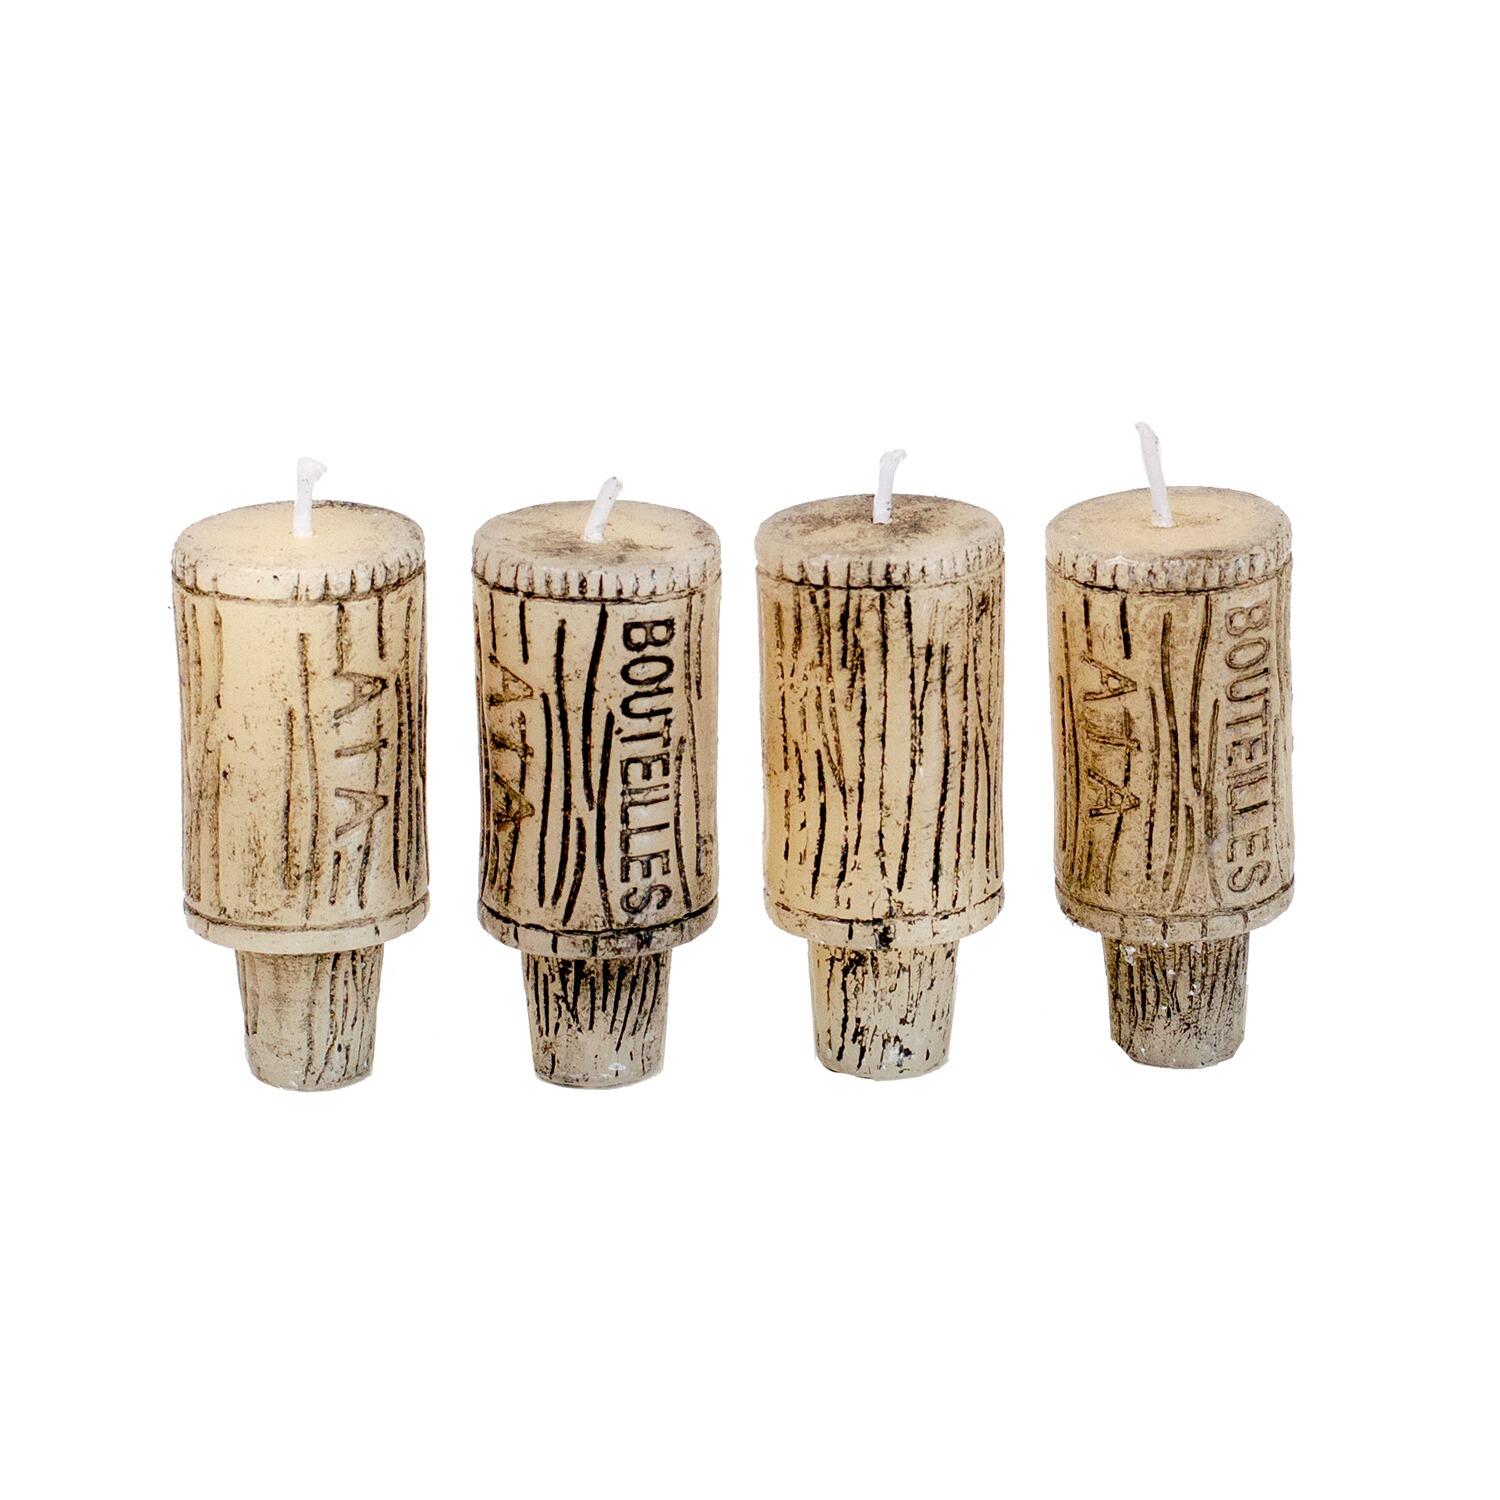 UBERSTAR Wine Candles (set of 4) - Only £11.99